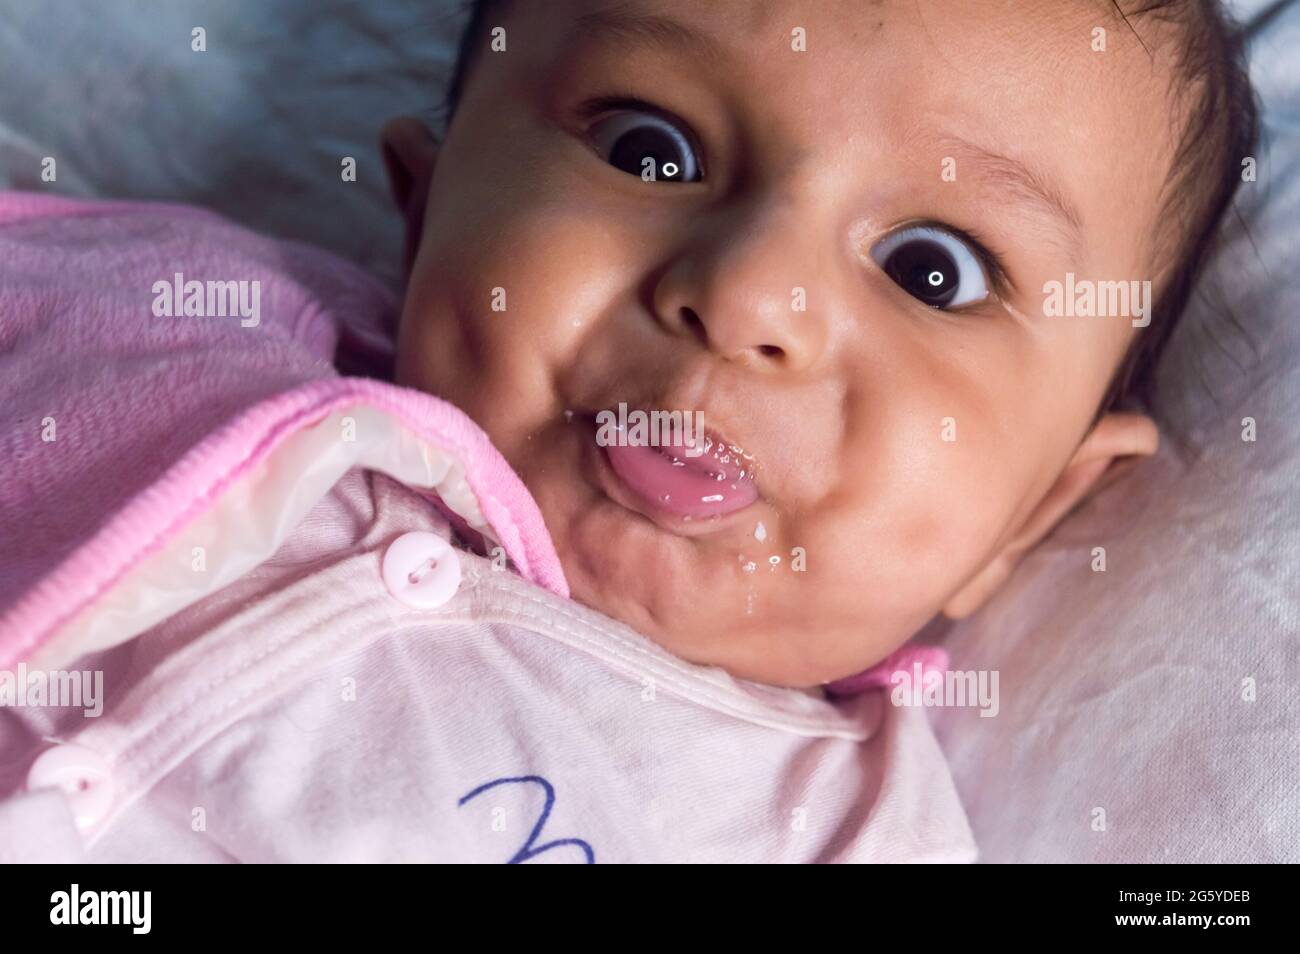 Cute baby boy wearing Baby Bib with dimple in face bubbles from mouth and  looking at camera. Sweet little infant toddler Closeup portrait. Indian  ethn Stock Photo - Alamy